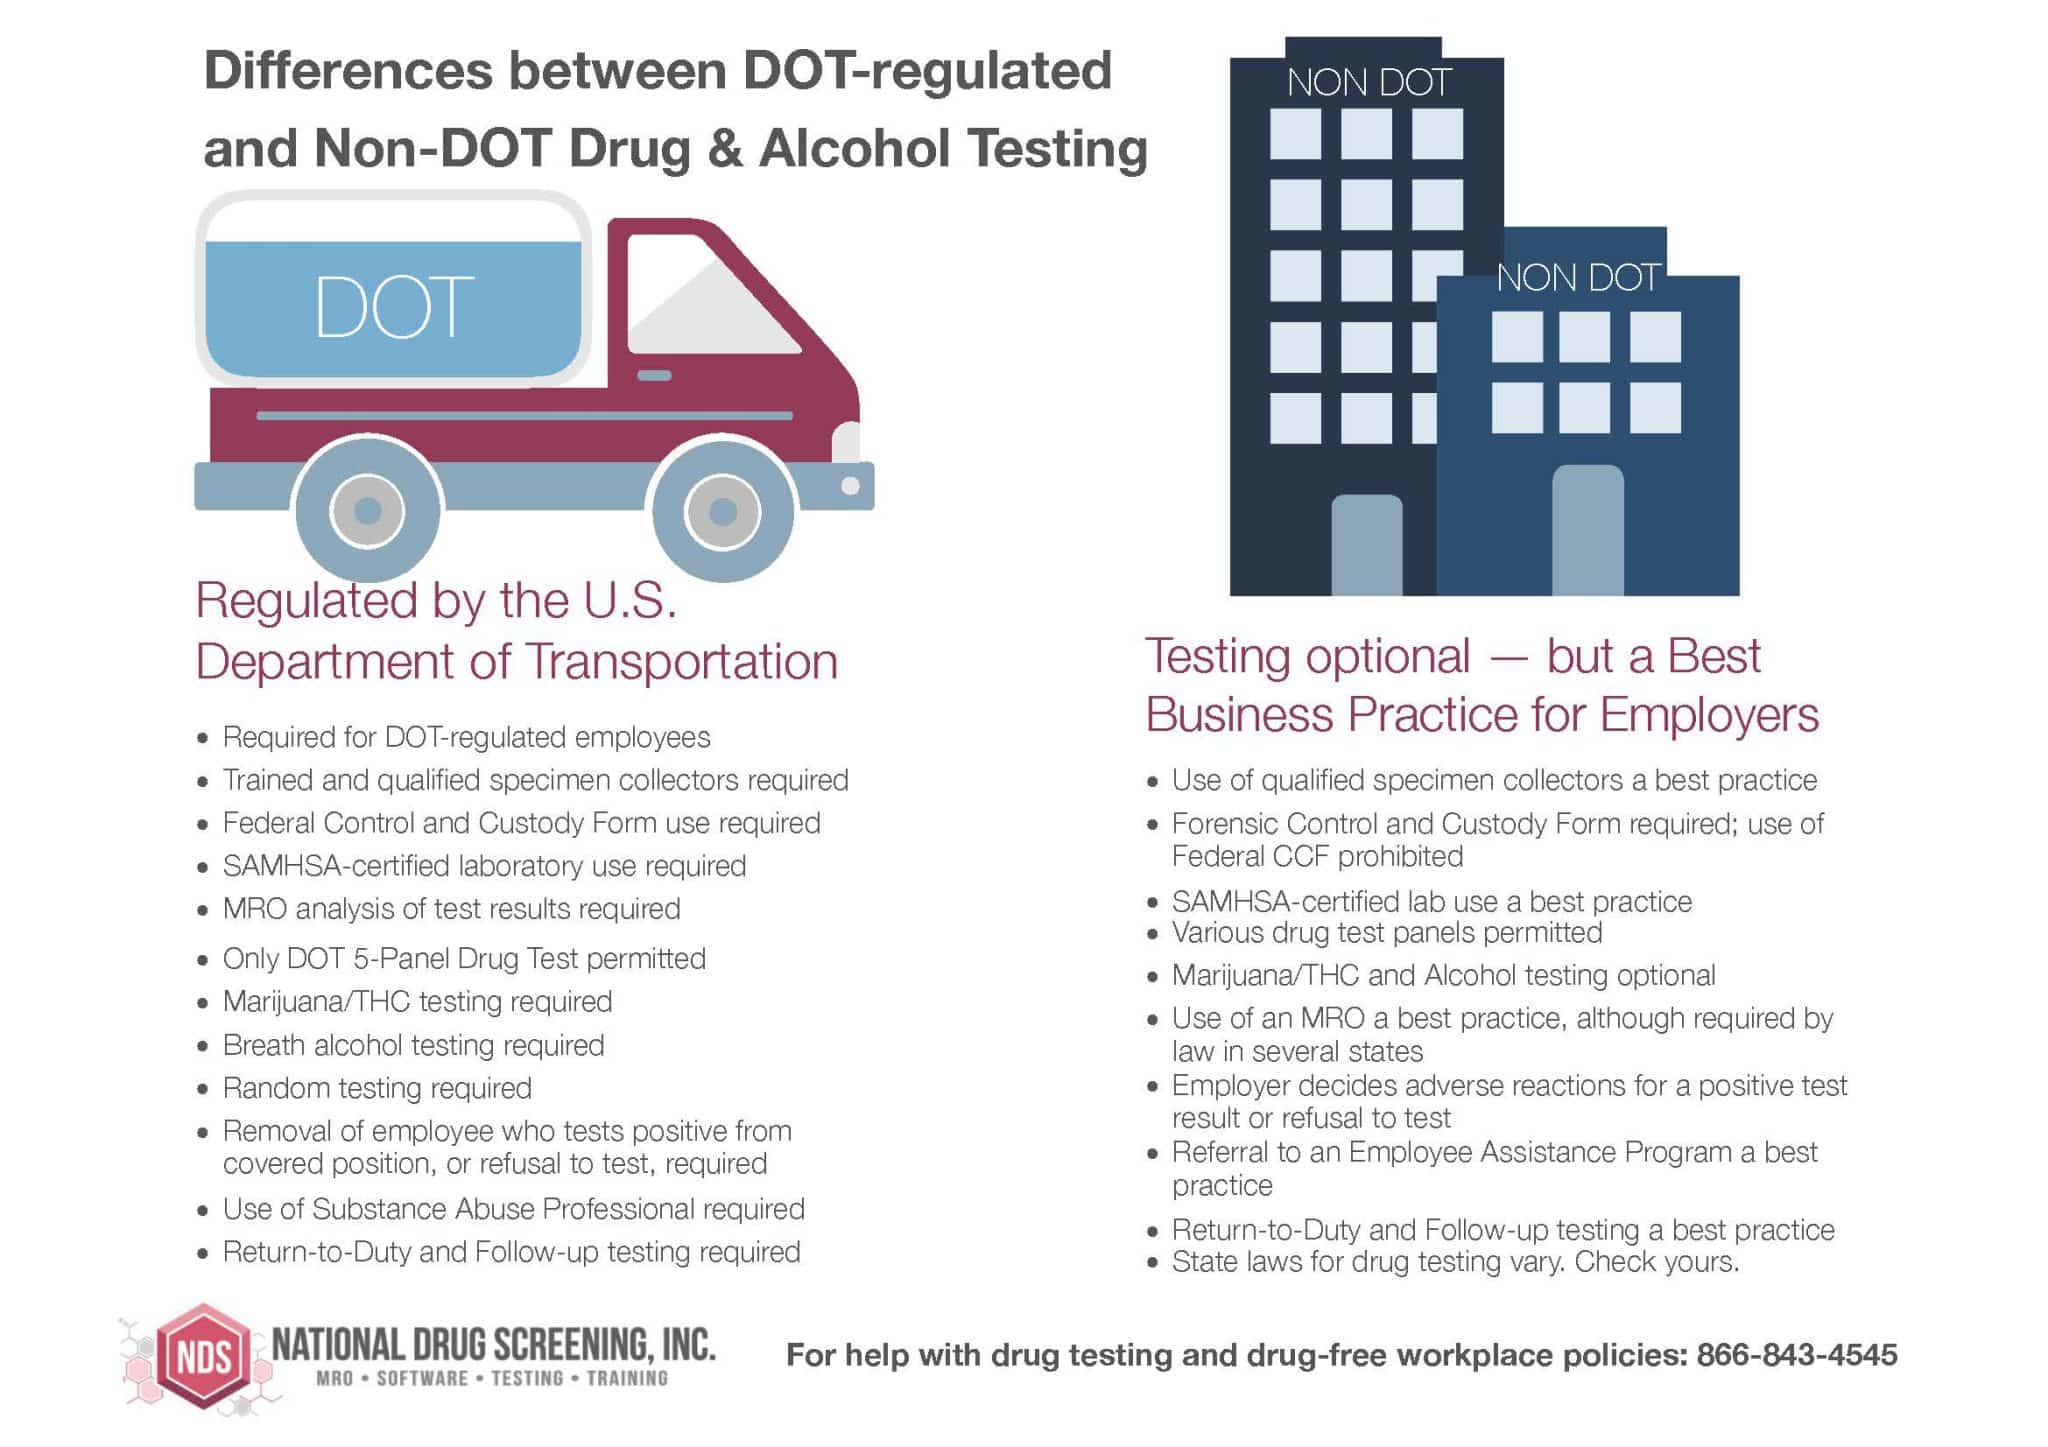 The Differences Between DOT and NonDOT Drug Testing